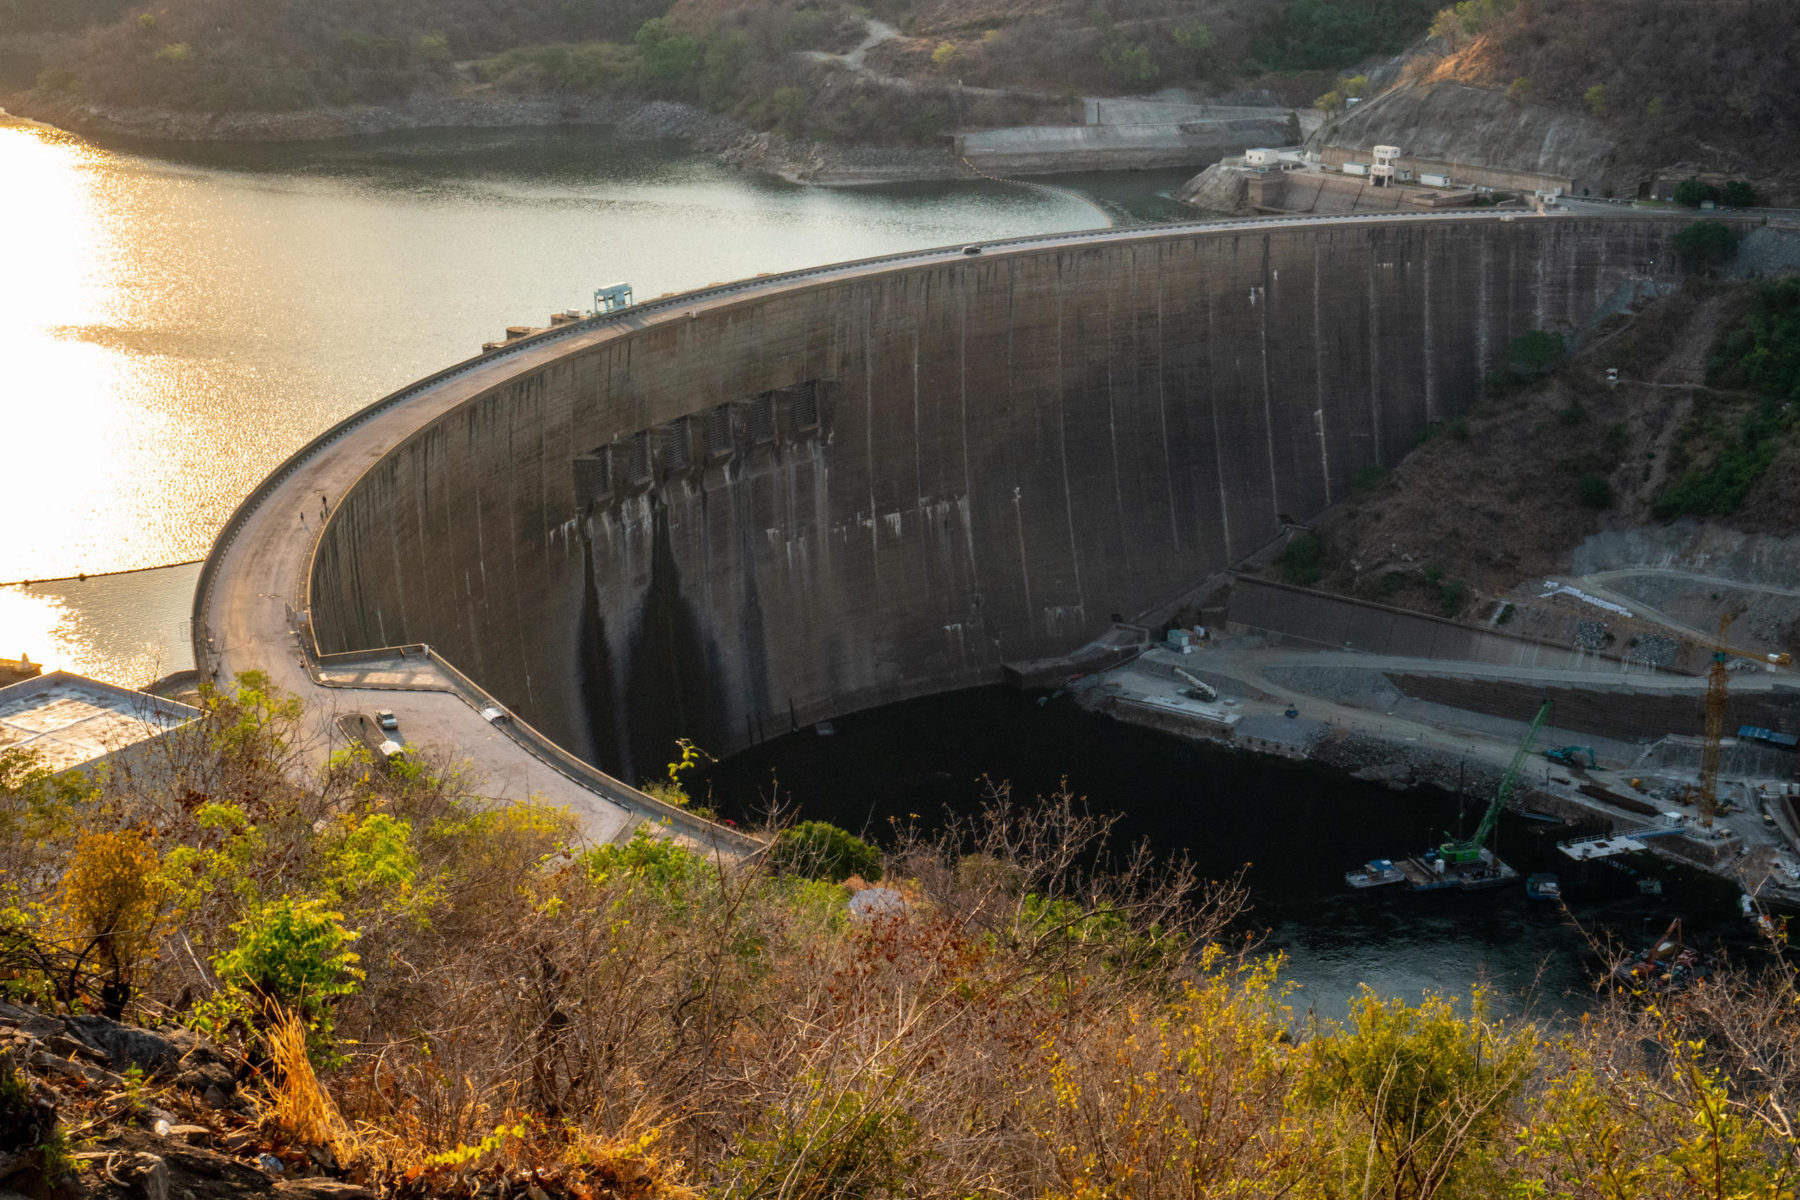 Zimbabwe has suffered serious power shortages in recent dry seasons as the reservoir behind the Kariba dam has been laid low by drought and evaporation (Image: Eyal Bartov / Alamy)